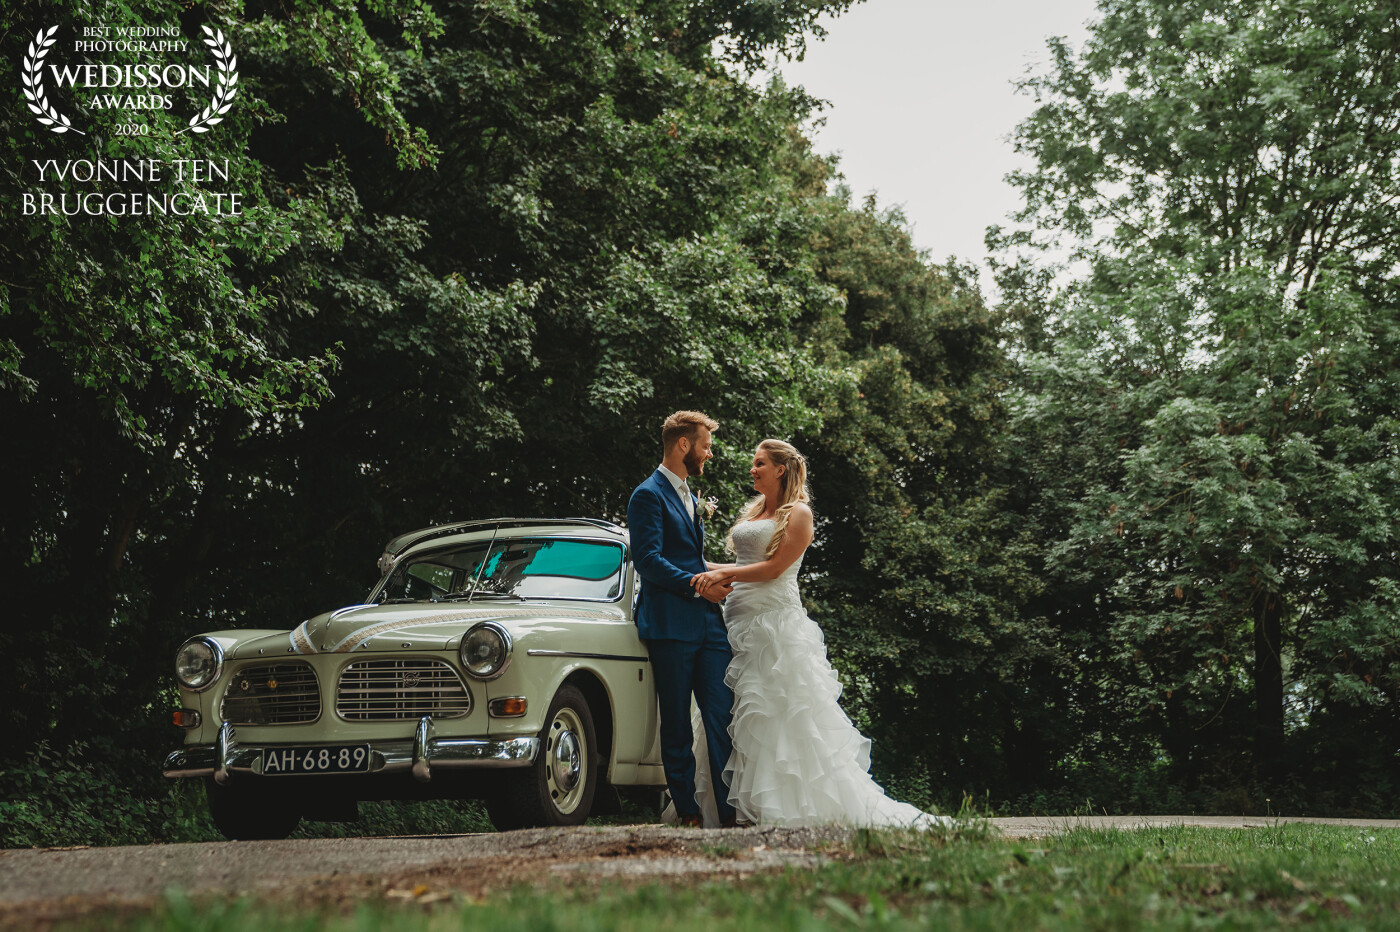 Thijs and Laura hired this beautiful green oldtimer for their wedding. Of course we should involve it in the photos. Look at her beautiful dress and the light. Can't believe it has been raining for more than an hour right before this moment. We where so lucky!